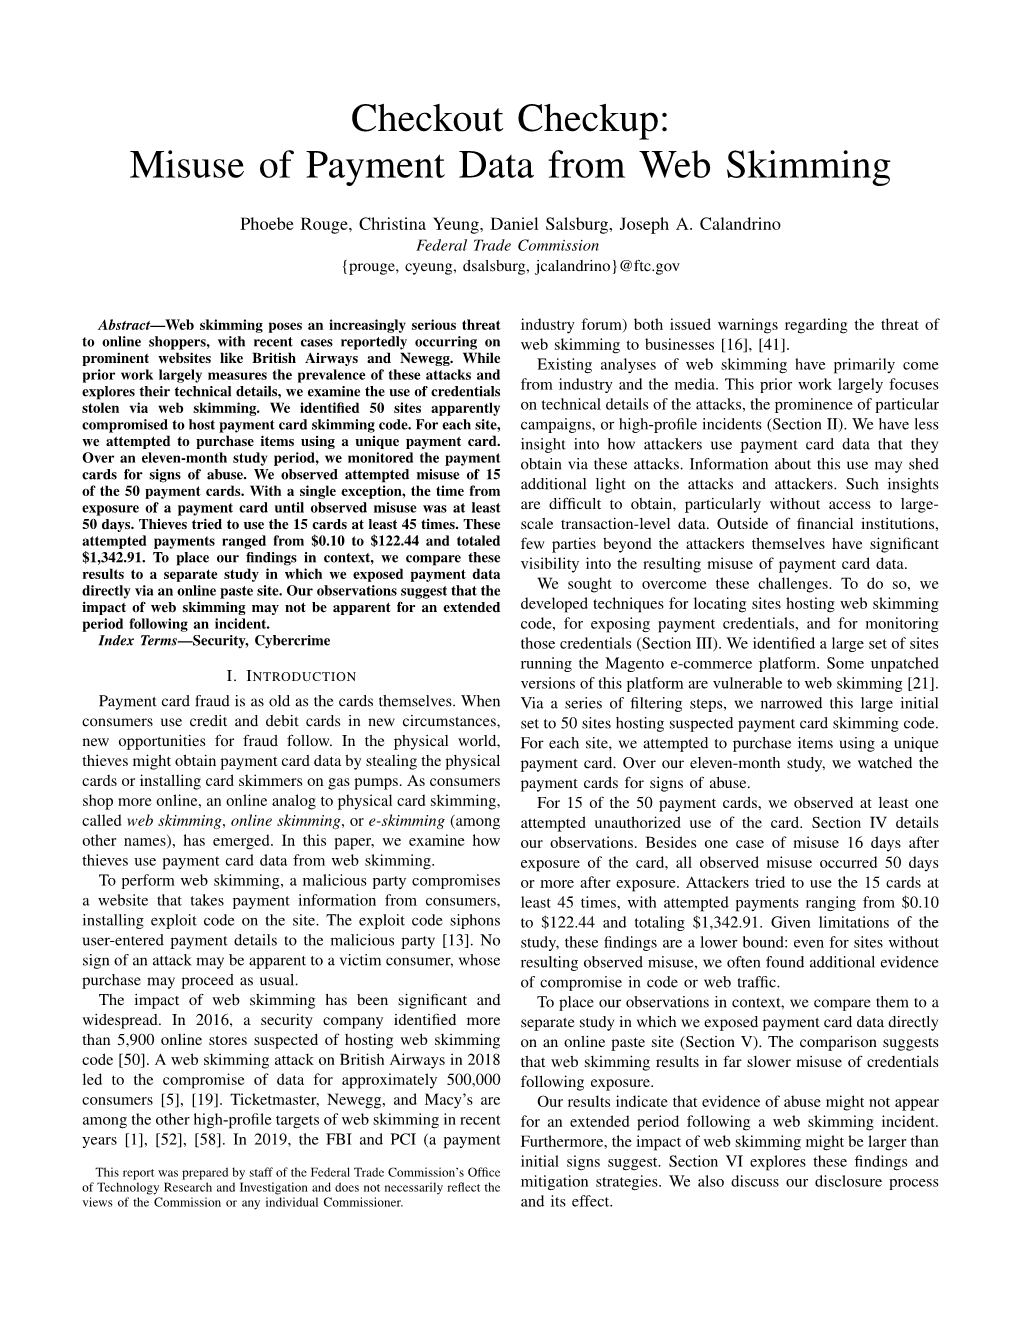 Misuse of Payment Data from Web Skimming